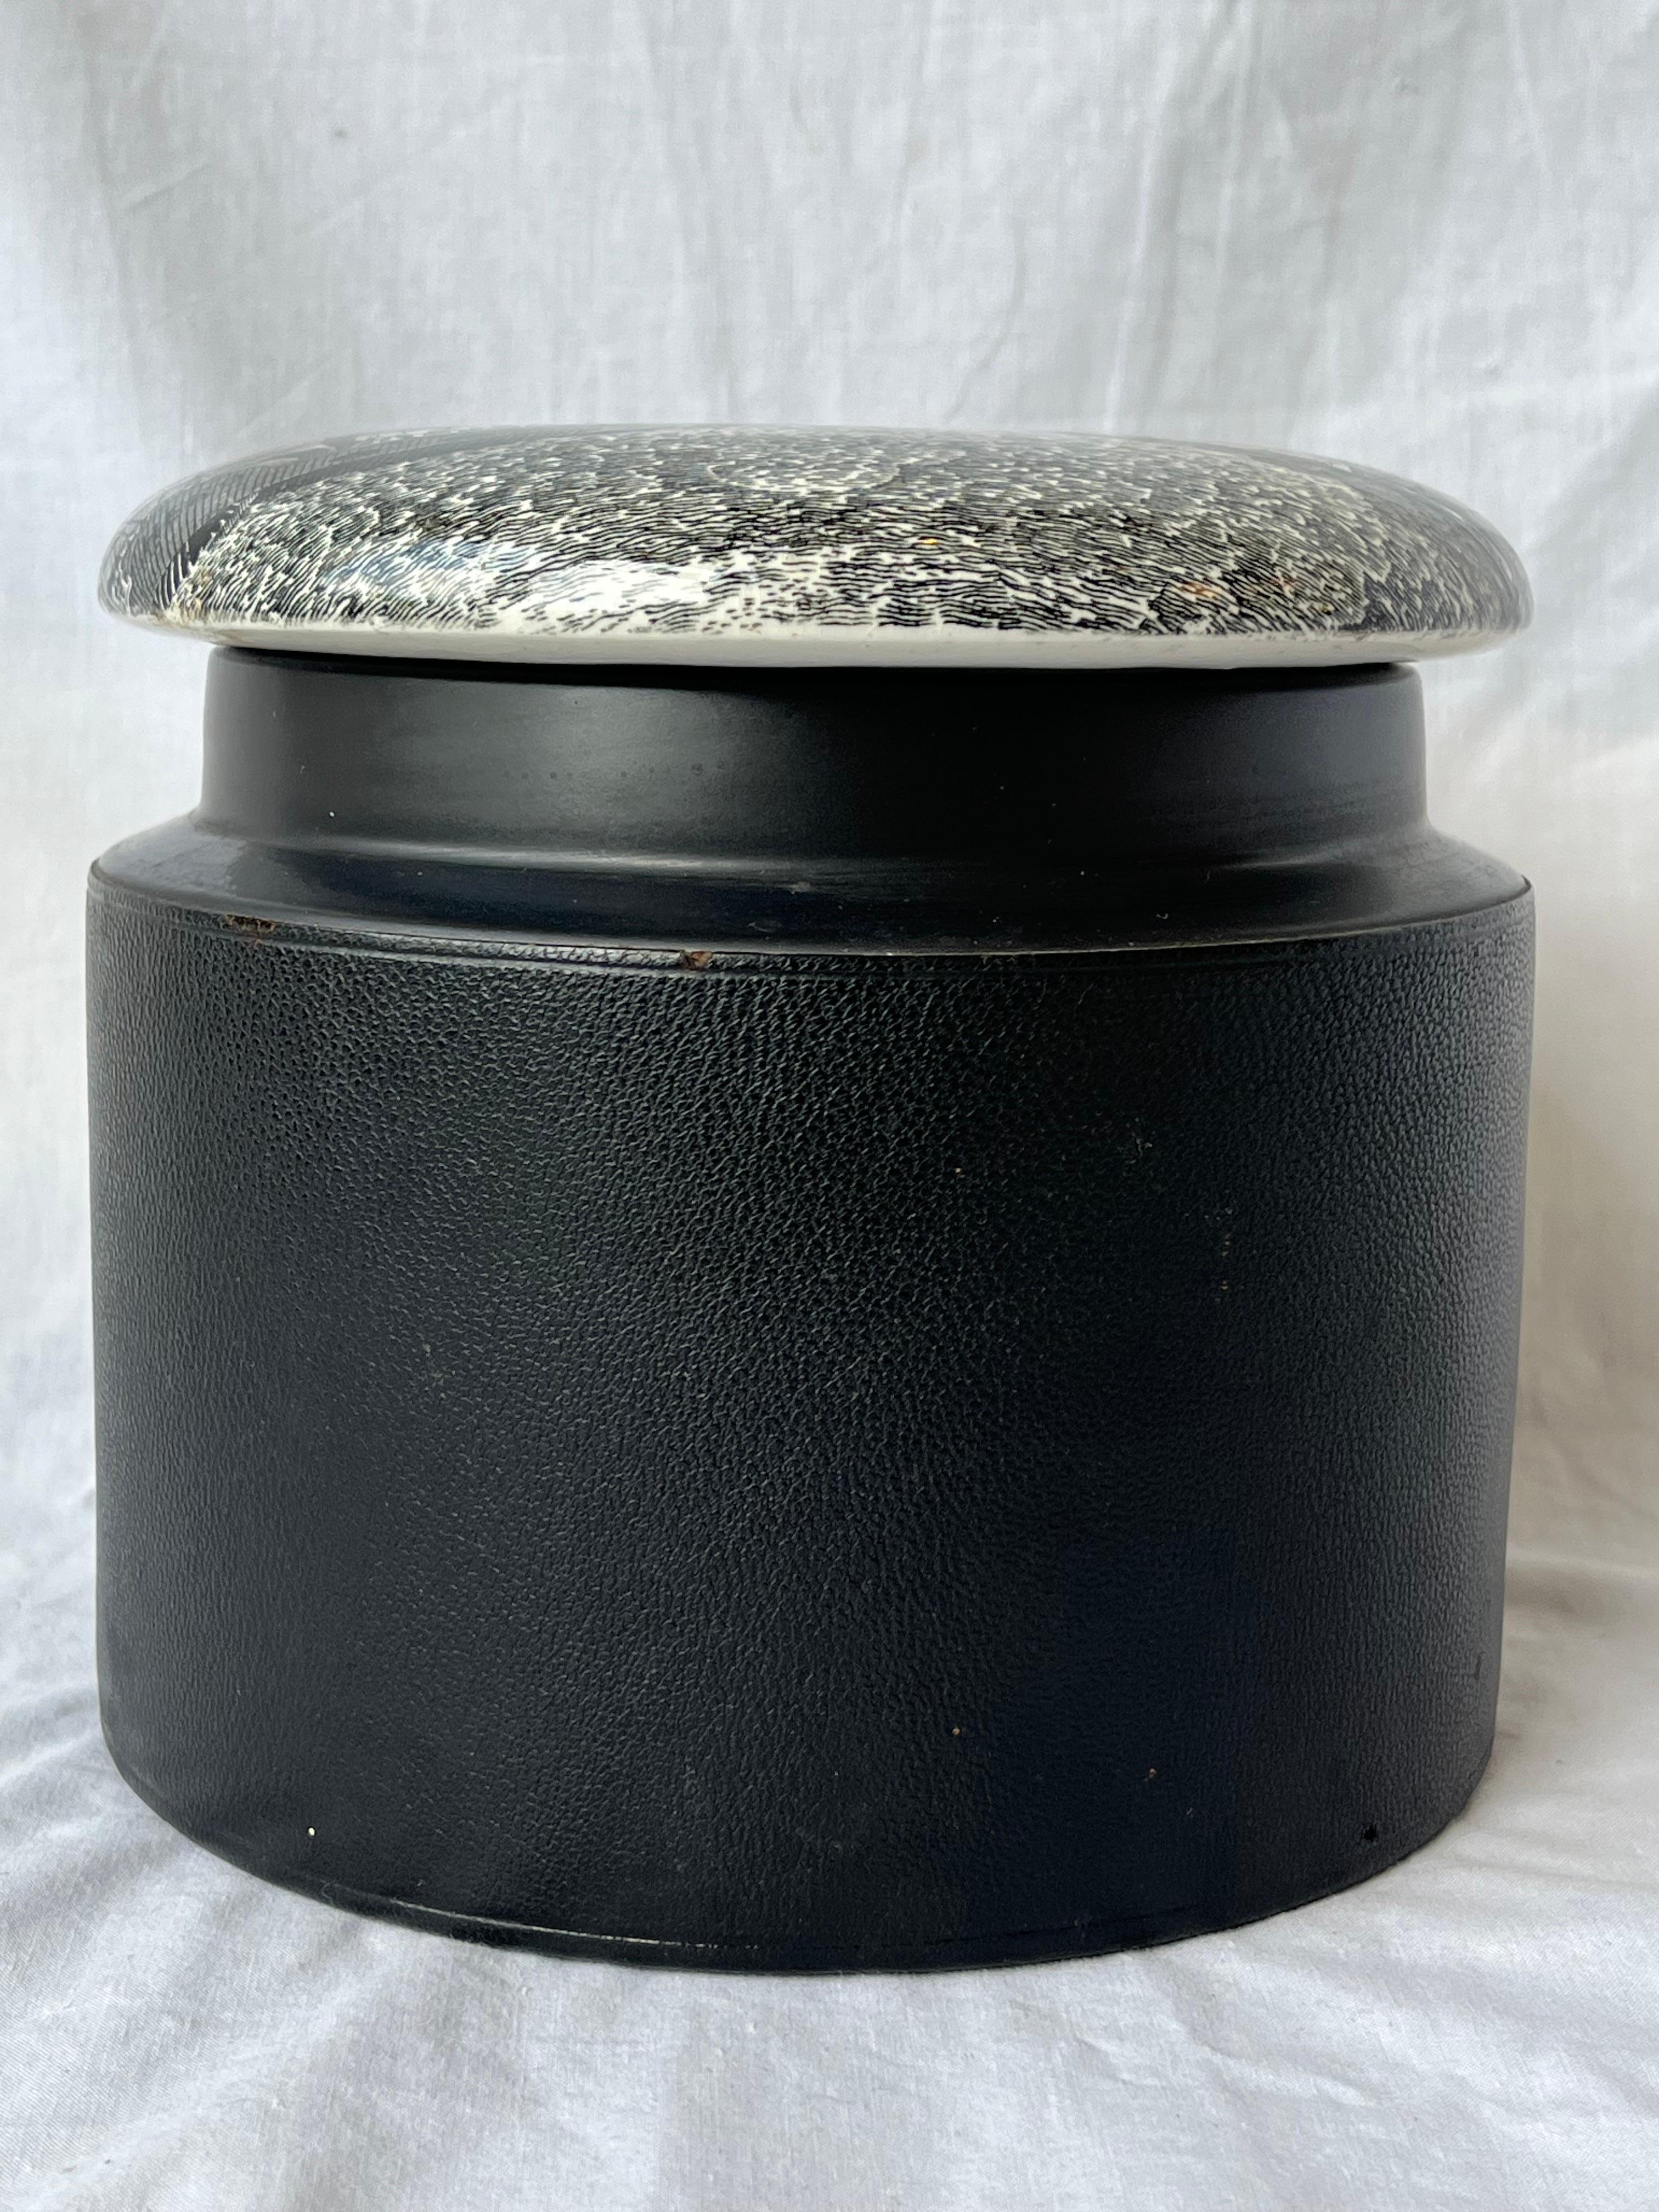 A vintage, 1970s era, lidded tobacco jar designed by Susan Williams-Ellis for Portmeirion and retailed through Comoy's of London. The lid is printed with a port scene. The body is wrapped in a textured leather. A little history of Portmeirion from